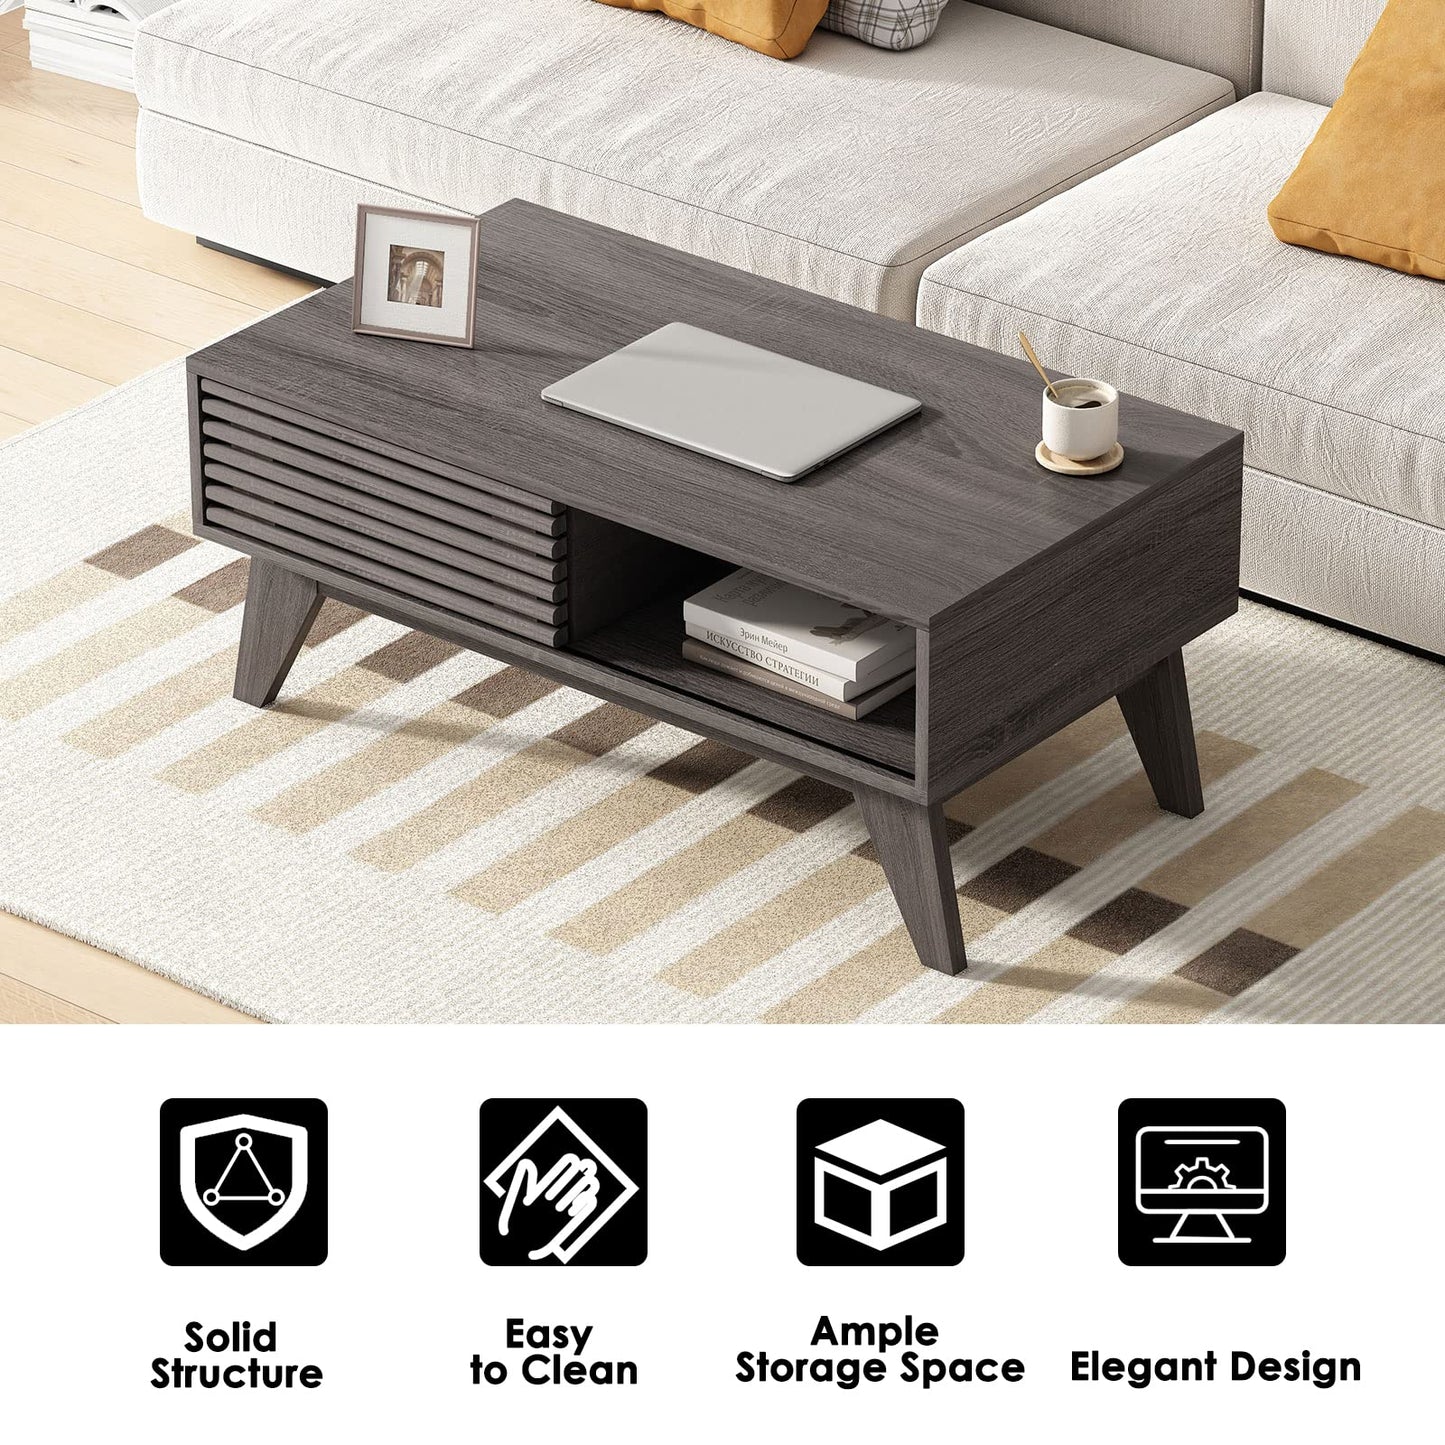 SogesHome Mid Century Wood Coffee Table, Cocktail Table Tea Table with Wood Slat Sliding Door, Snack Coffee Station with 2-Tier Storage Shelves for Living-Room, Grey